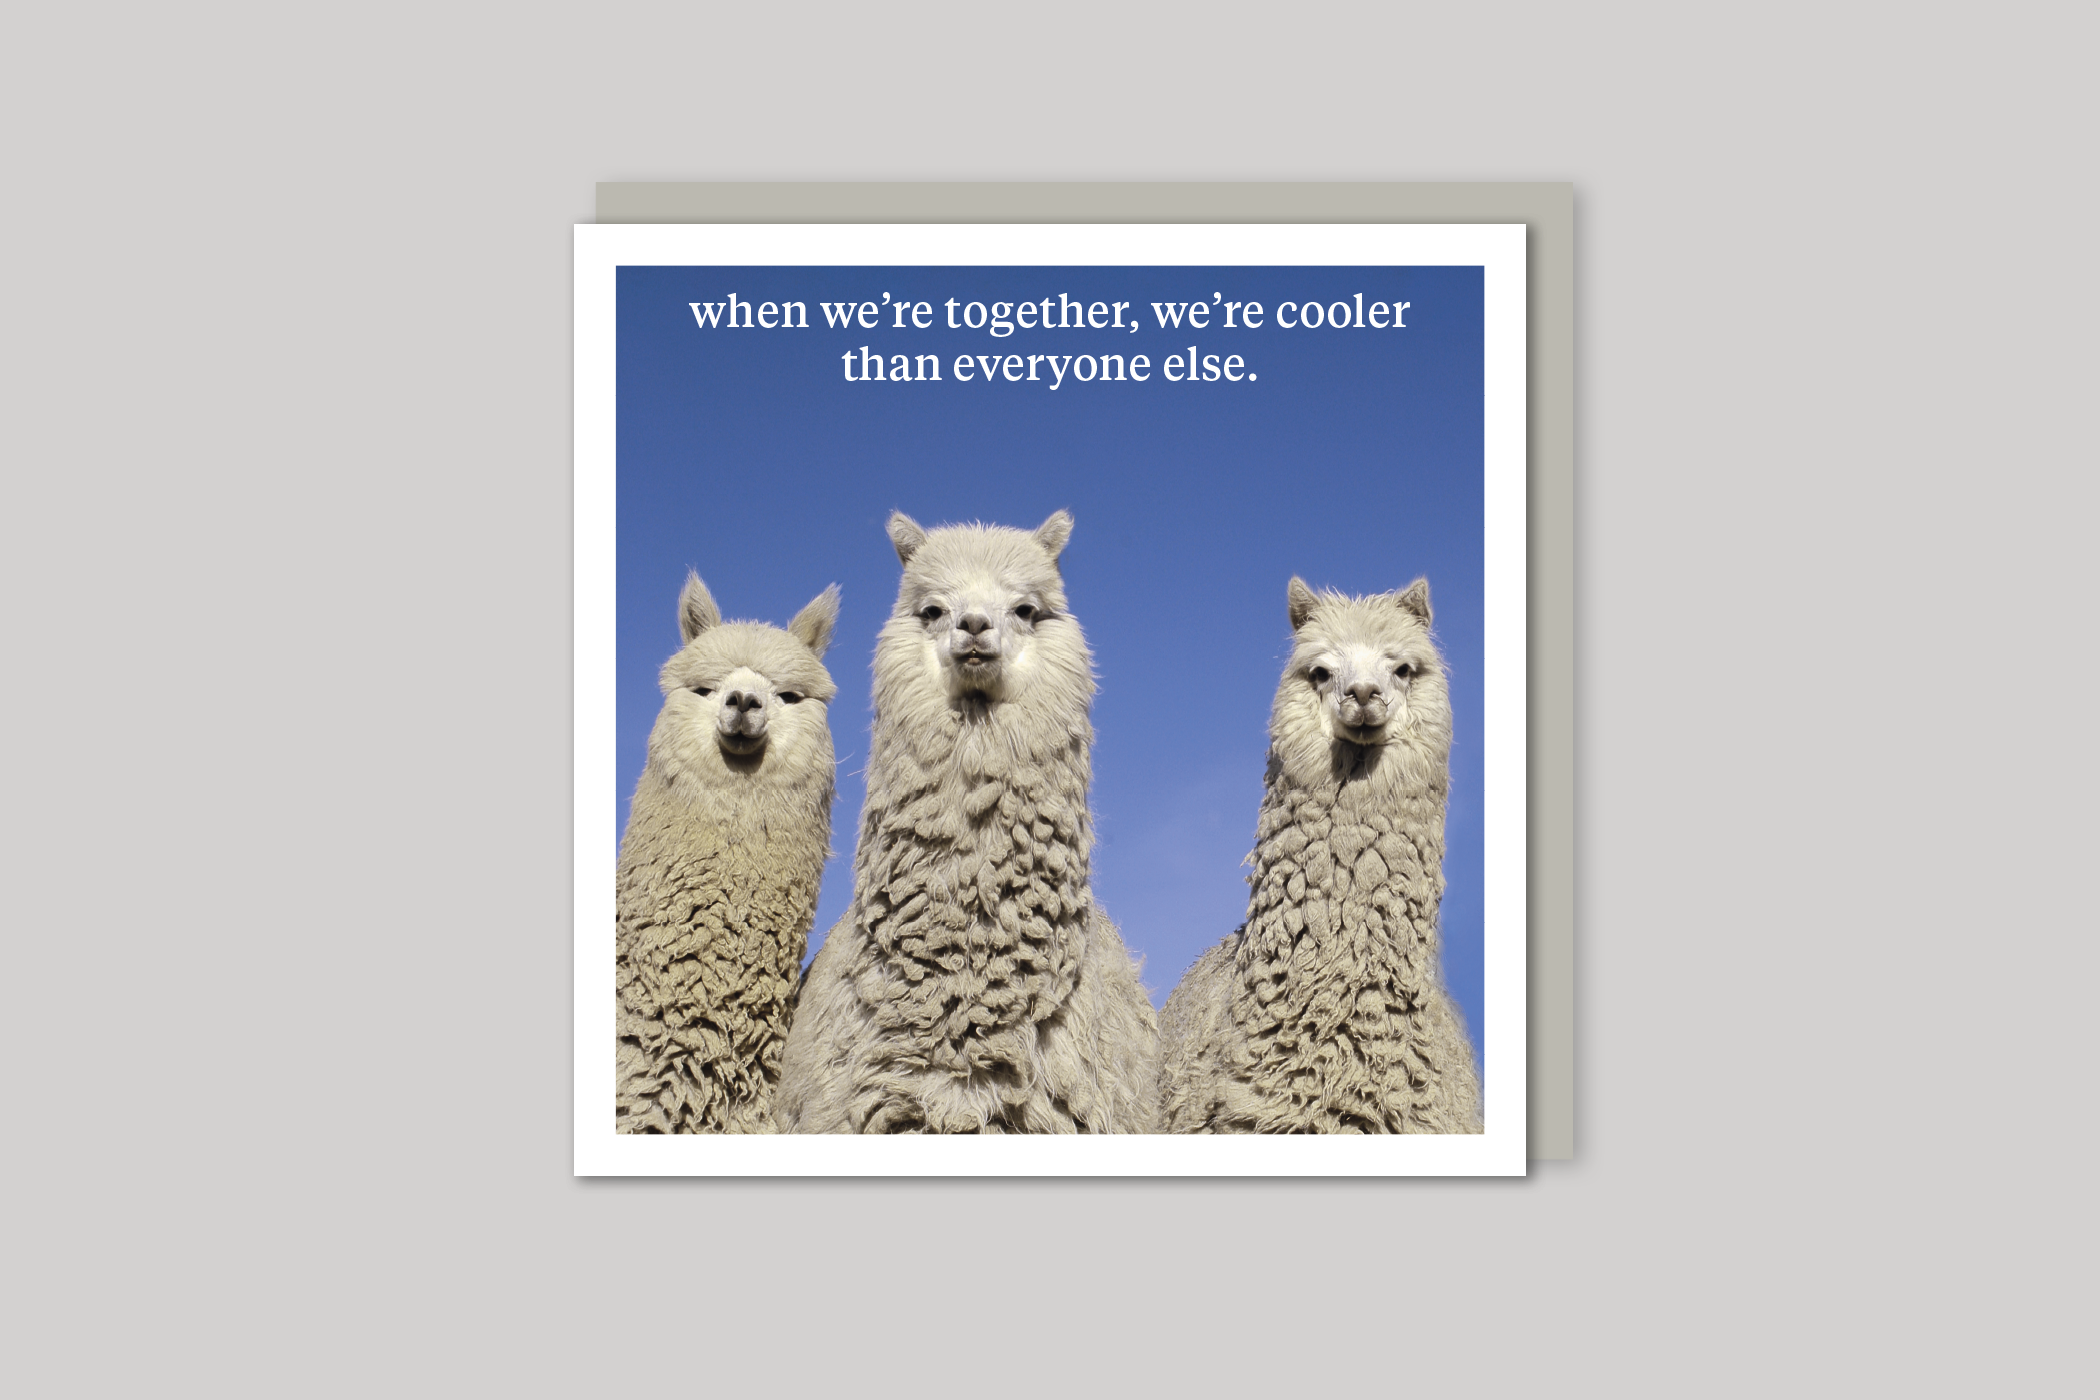 We're Cool quirky animal portrait from Curious World range of greeting cards by Icon, back page.